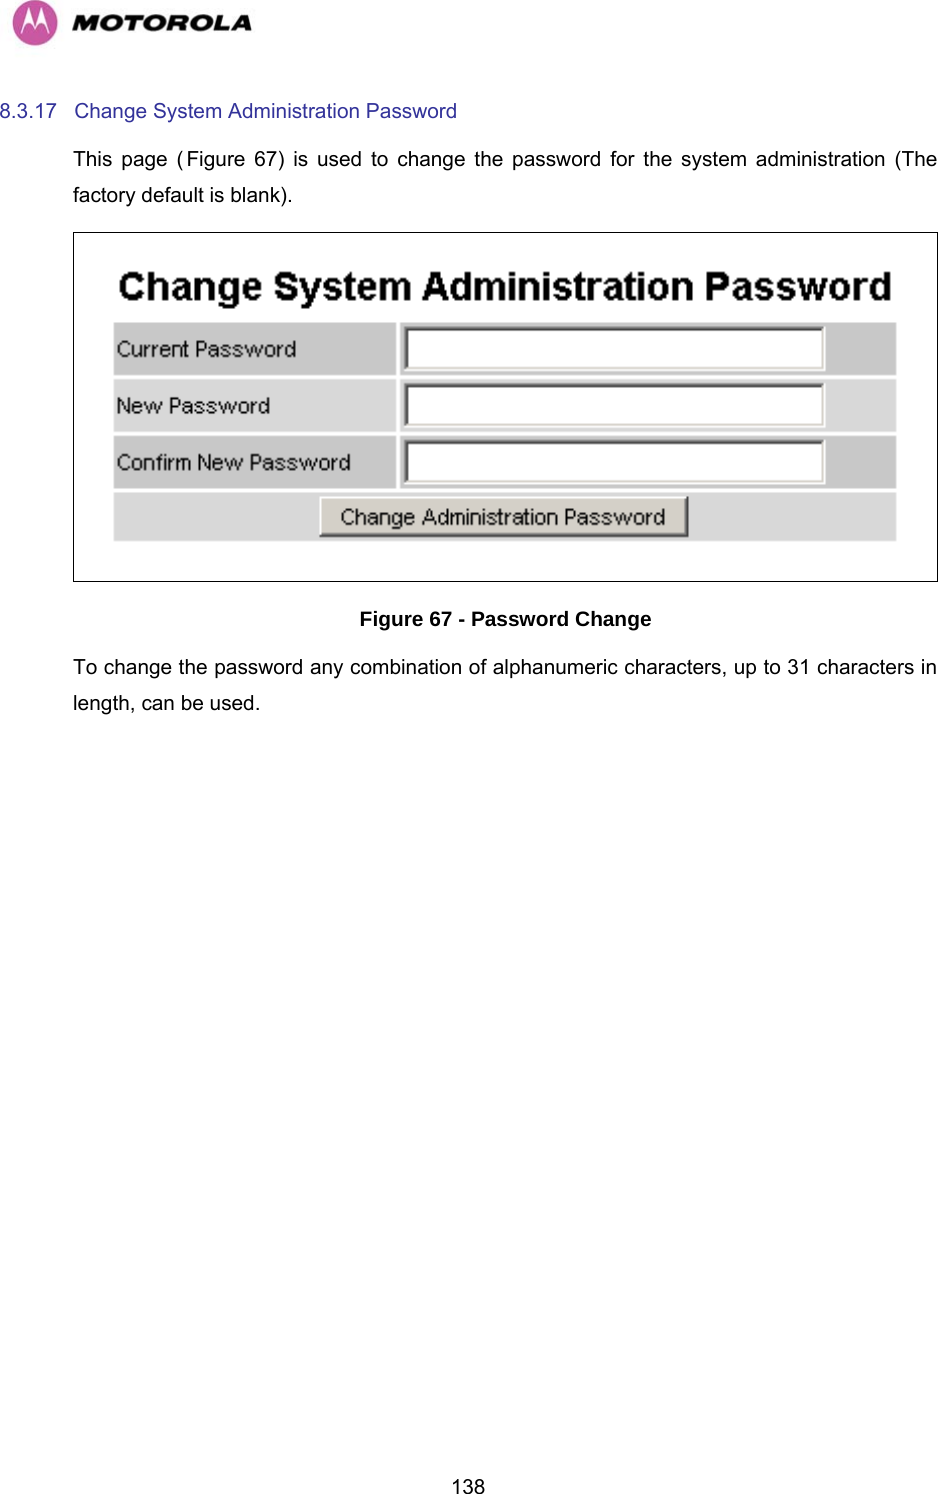   1388.3.17  Change System Administration Password  This page (HFigure 67) is used to change the password for the system administration (The factory default is blank).  Figure 67 - Password Change To change the password any combination of alphanumeric characters, up to 31 characters in length, can be used. 